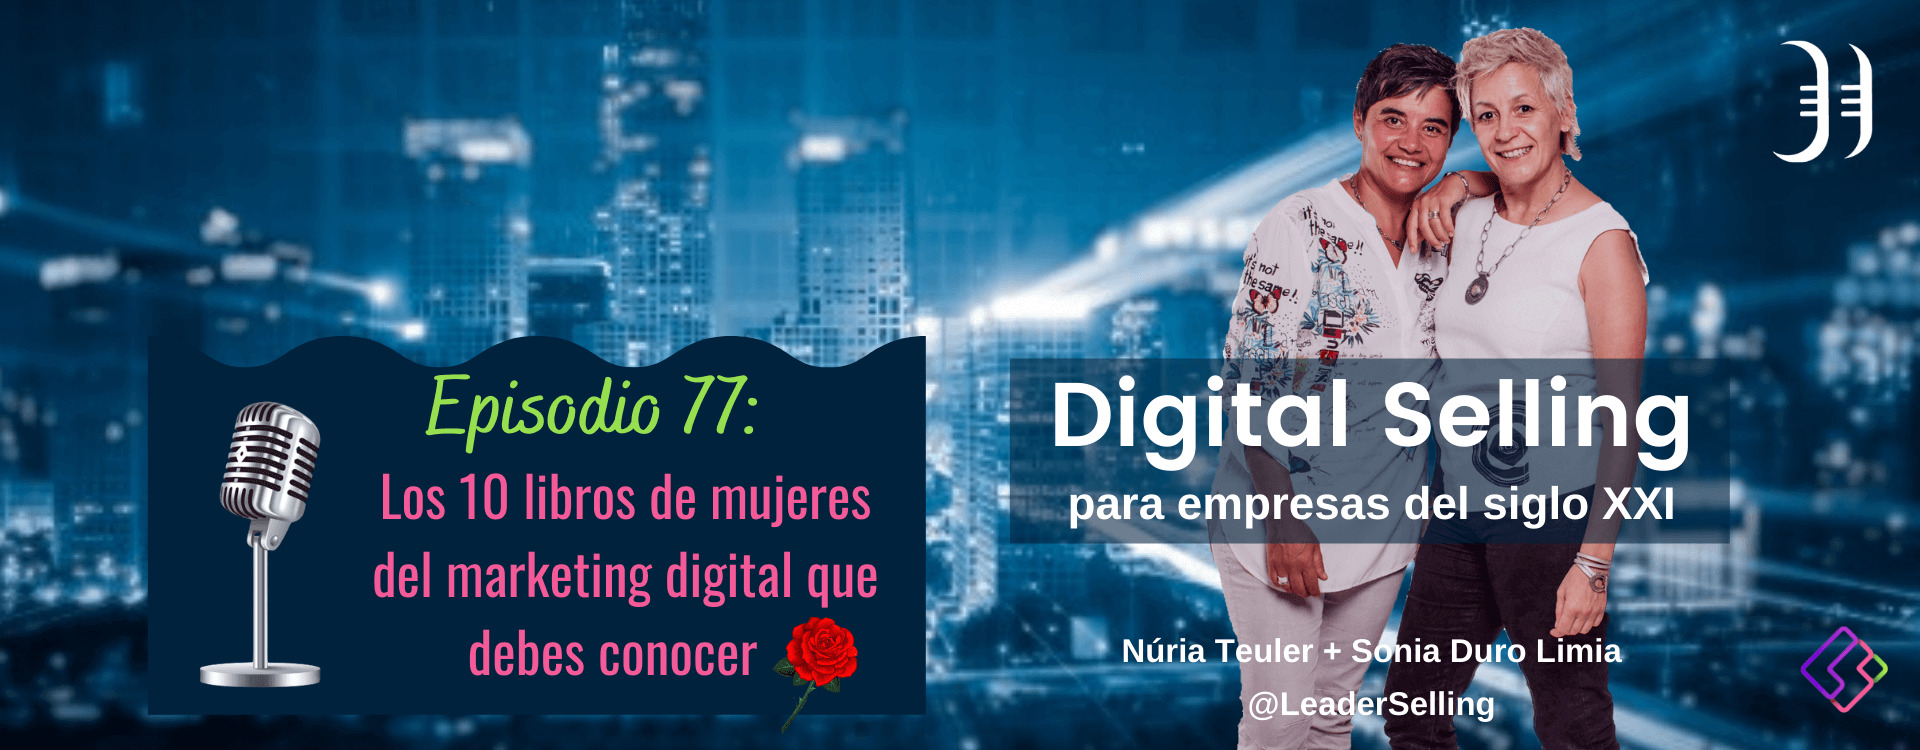 leader-selling-episodio-77-libros-mujeres